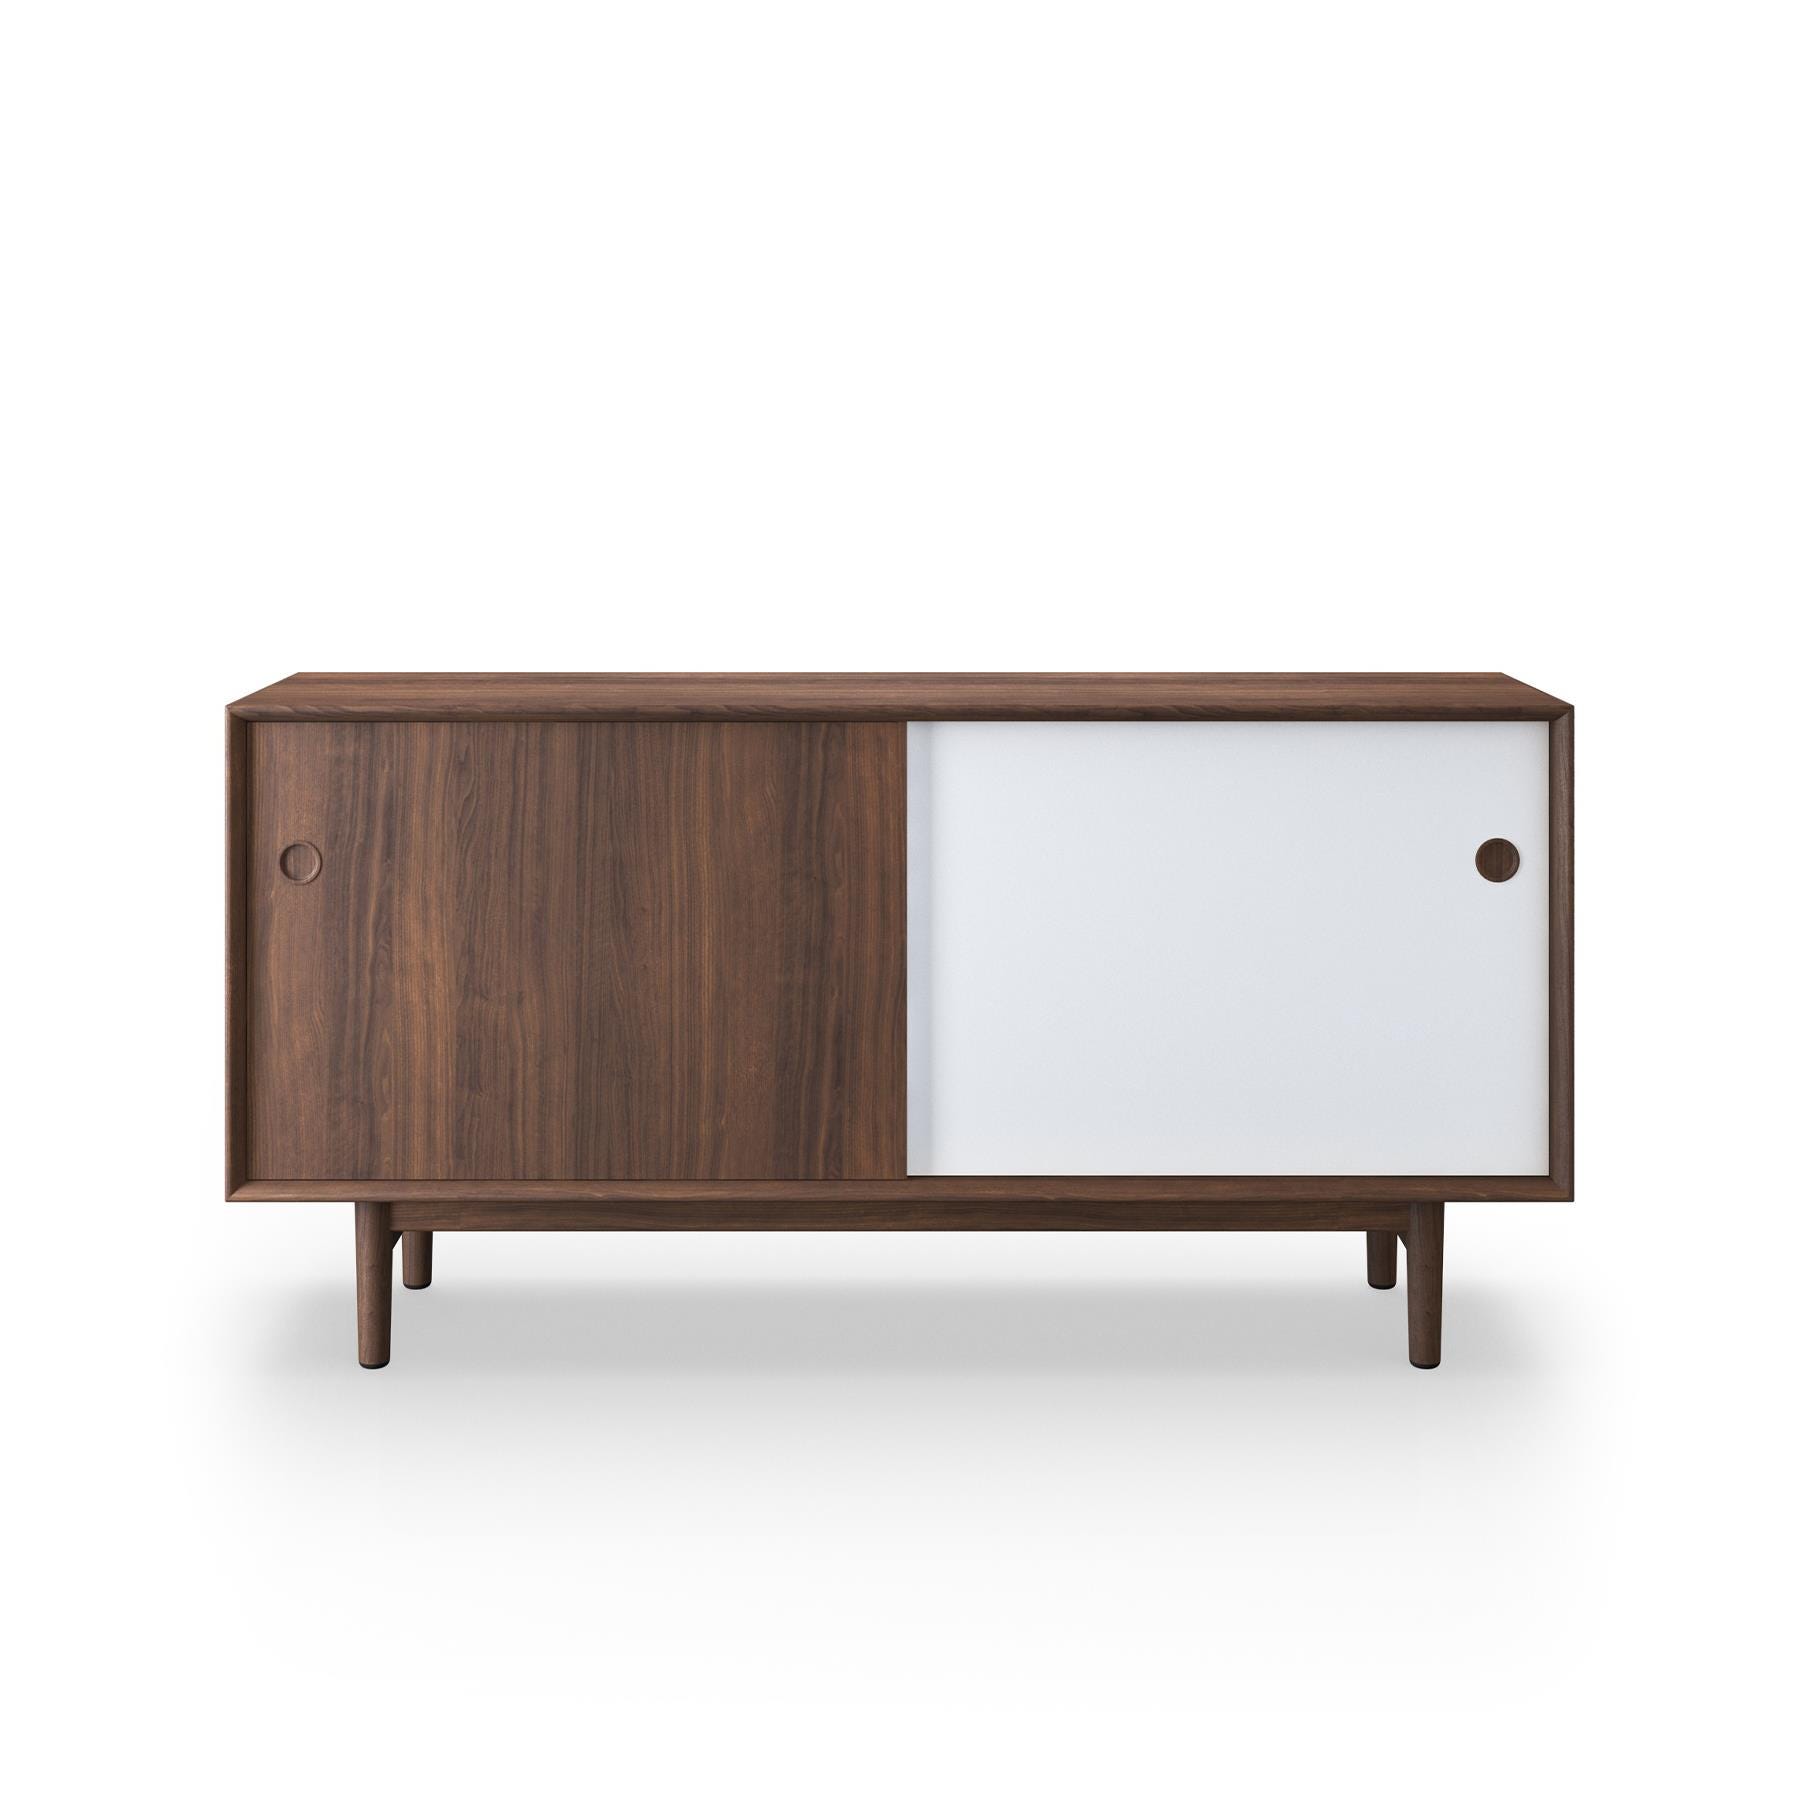 Sibast No 11 Sideboard Walnut White And Natural Front Wooden Legs Dark Wood Designer Furniture From Holloways Of Ludlow